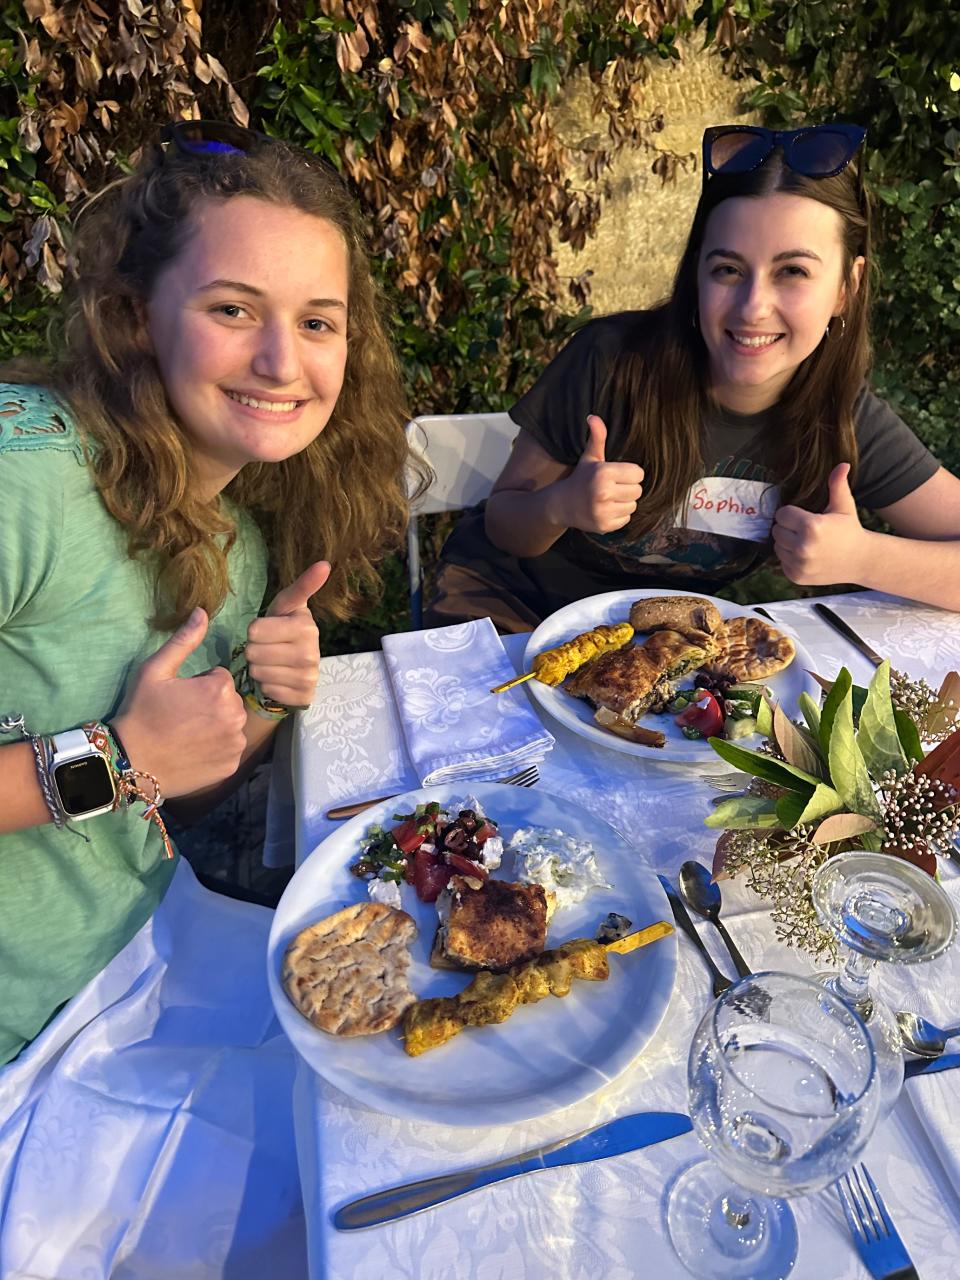 Sophia Preston (R) savoring authentic Greek flavors during the welcome dinner hosted by Dr. Jeff Lansdale, president of the American Farm School, alongside AvaLee Cobbs, a Sandusky 4-H member